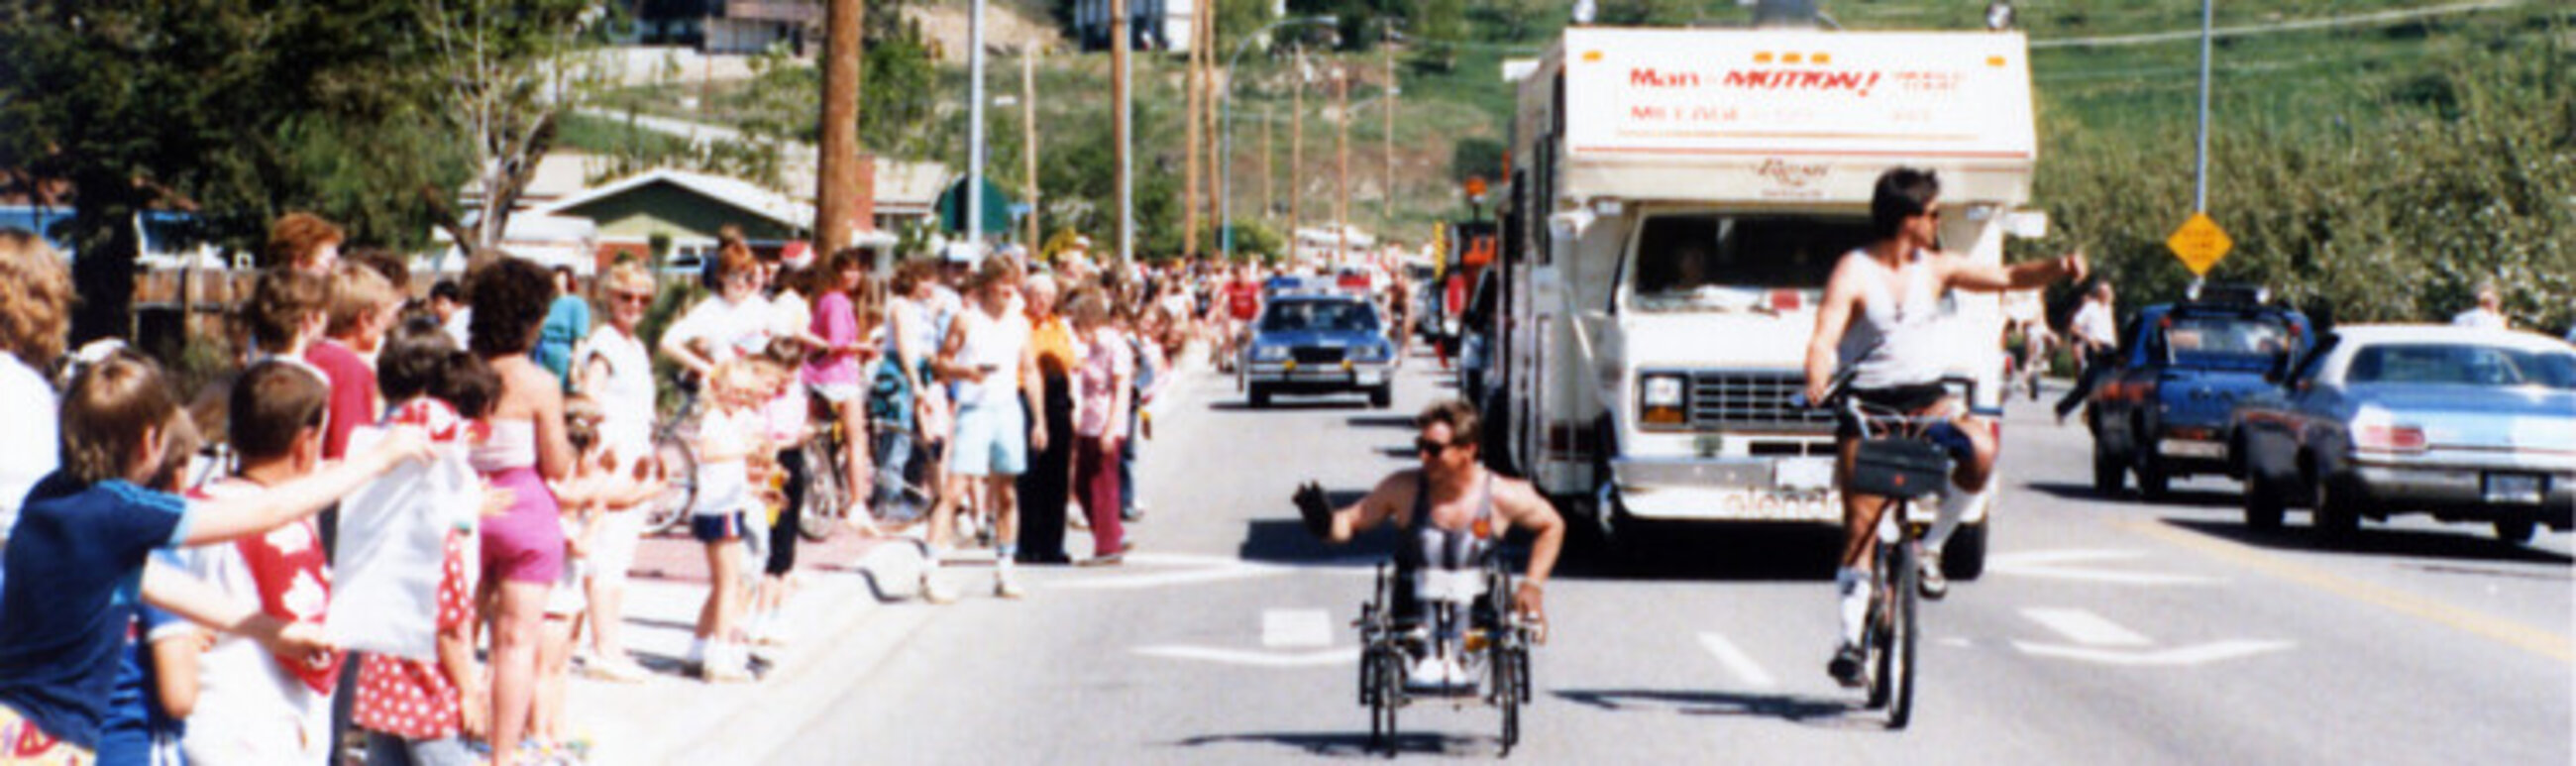 Rick Hansen during the Man In Motion World Tour. Rick is waving to a crowd of supporters on the side of the road. 